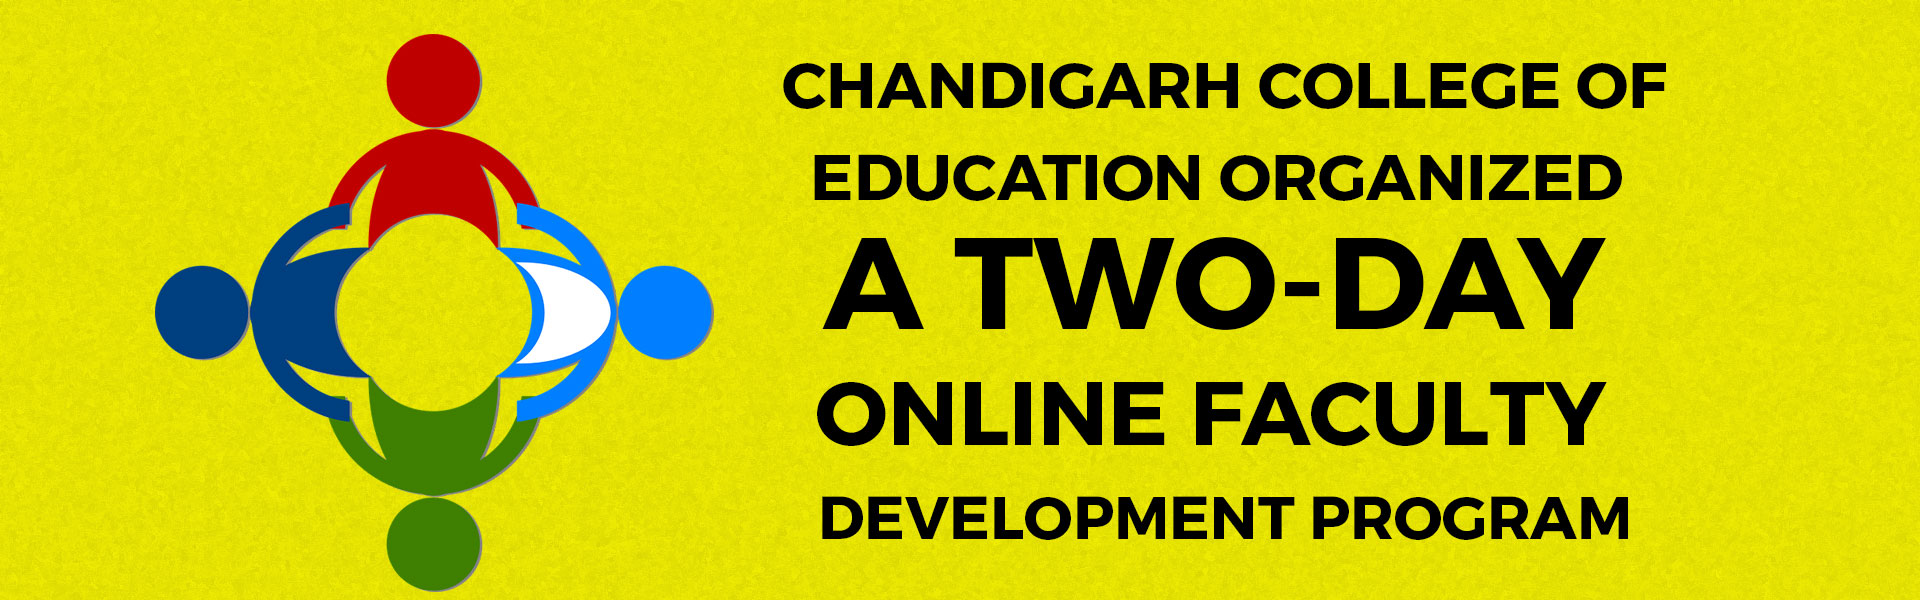 Chandigarh College of Education organized a two-day, online Faculty Development program 